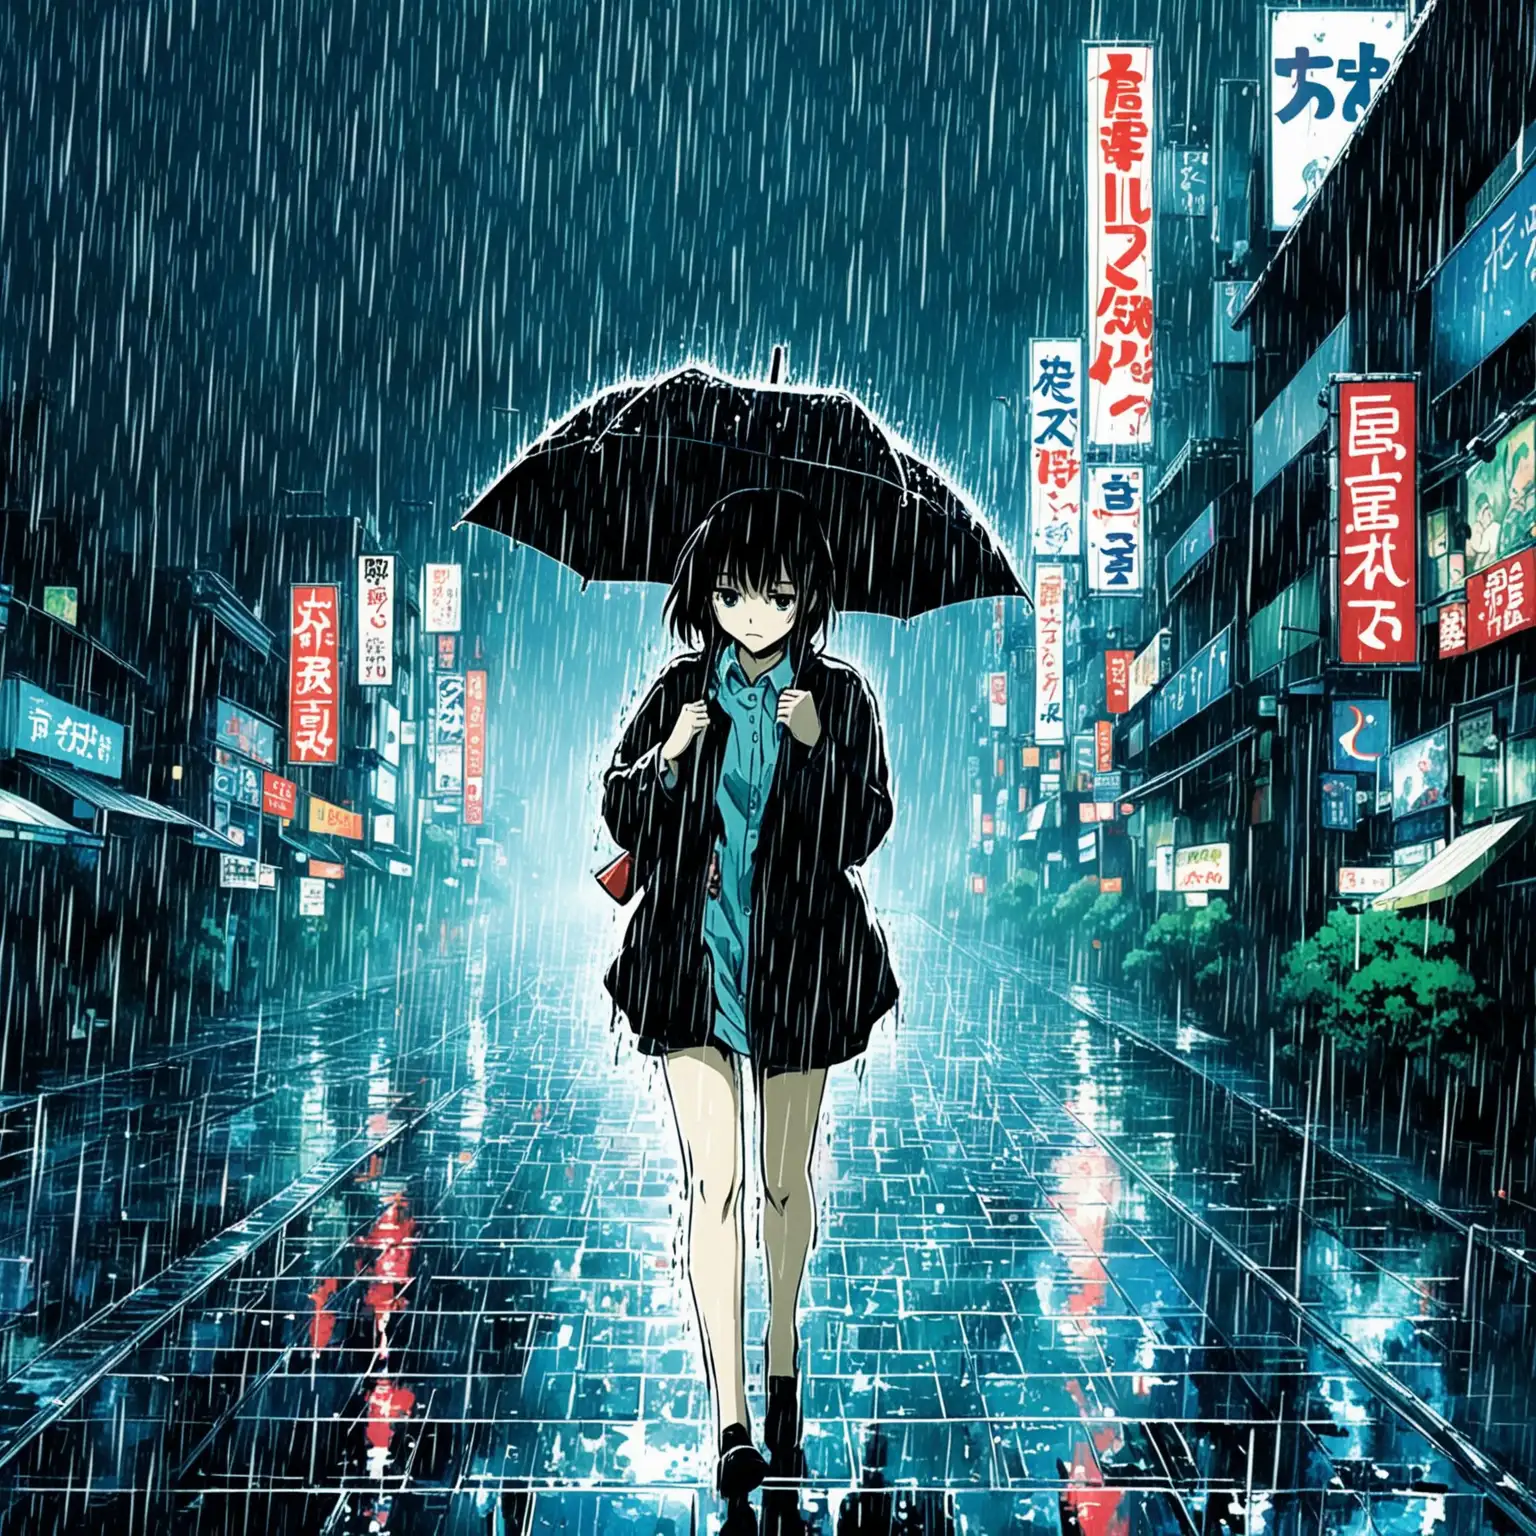 Anime girl, caught out in the rain, song cover image, stylised image, far away, tokyo